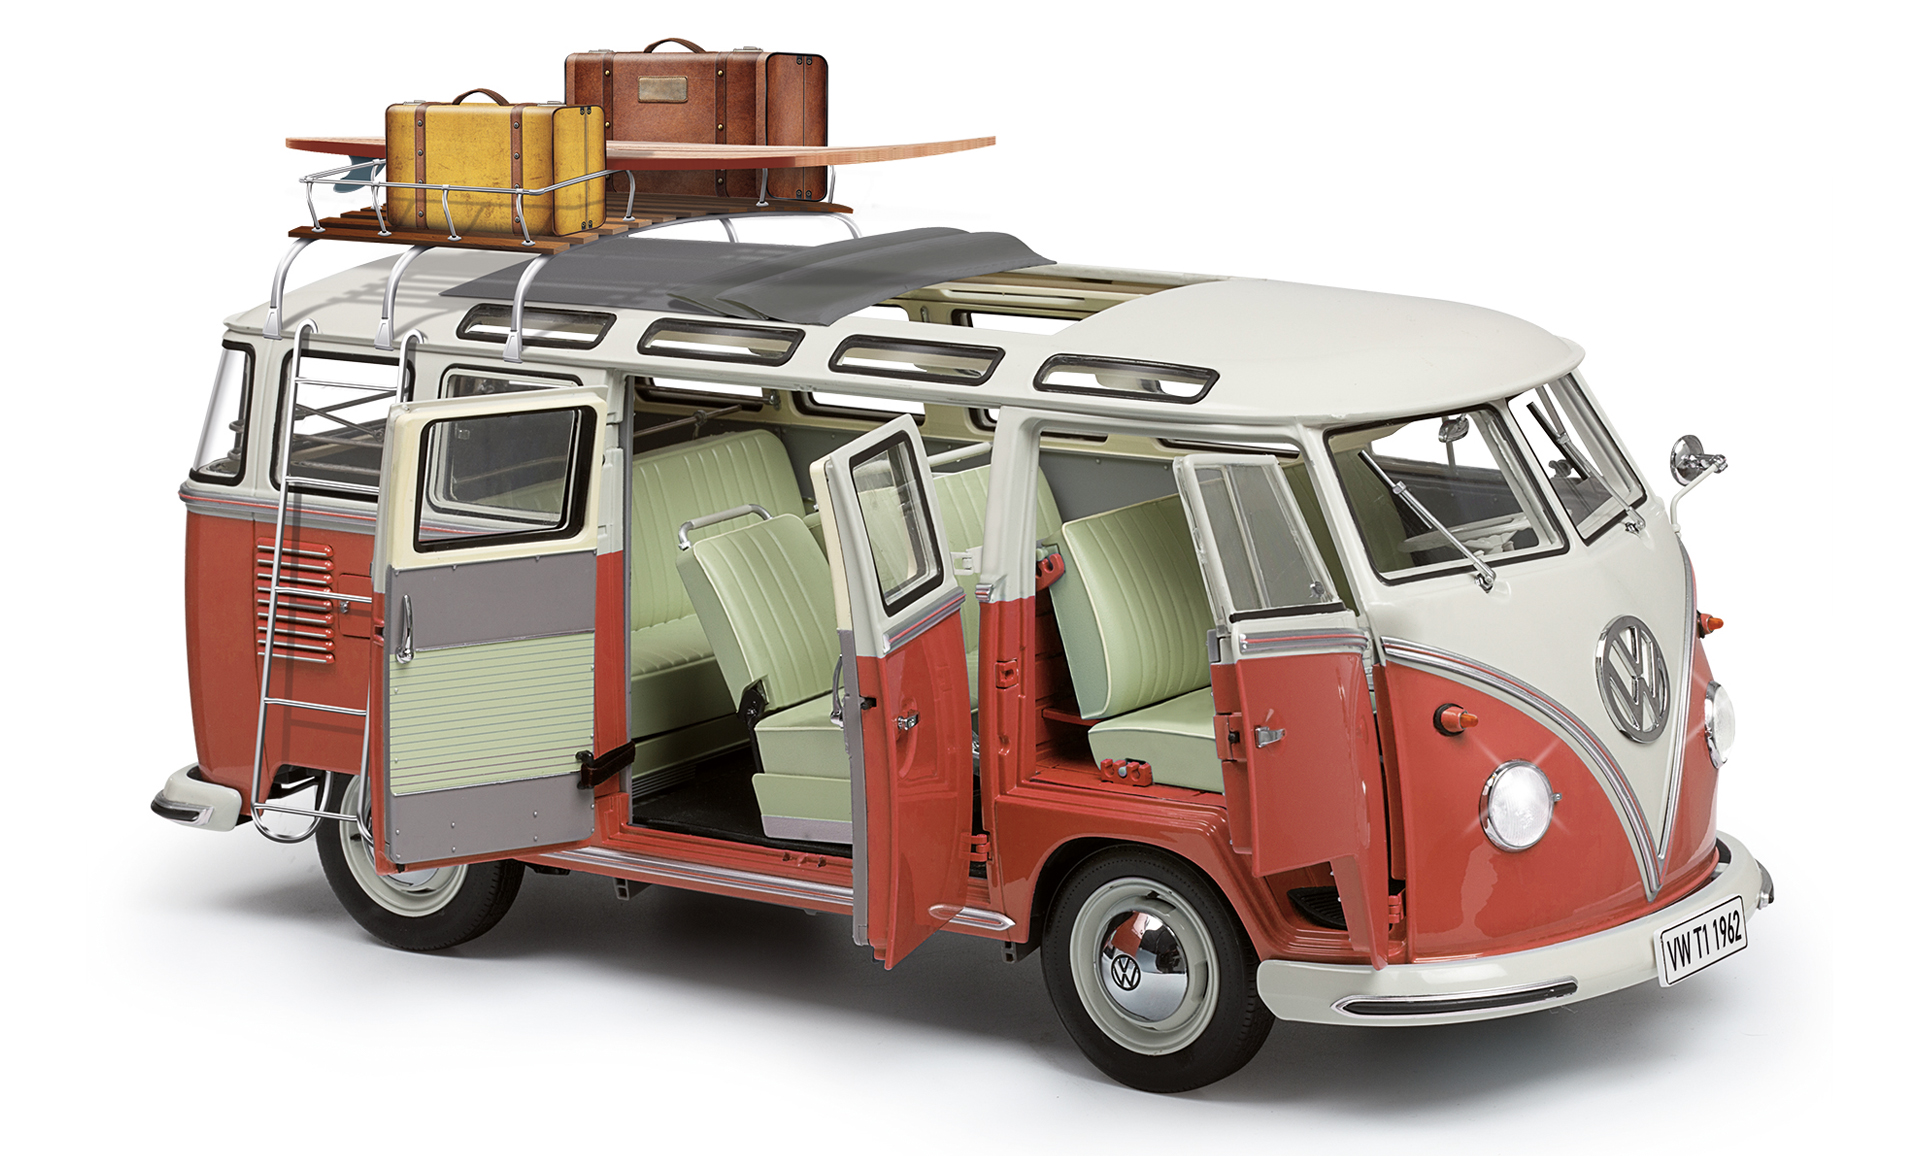 Volkswagen Bus - History and Facts